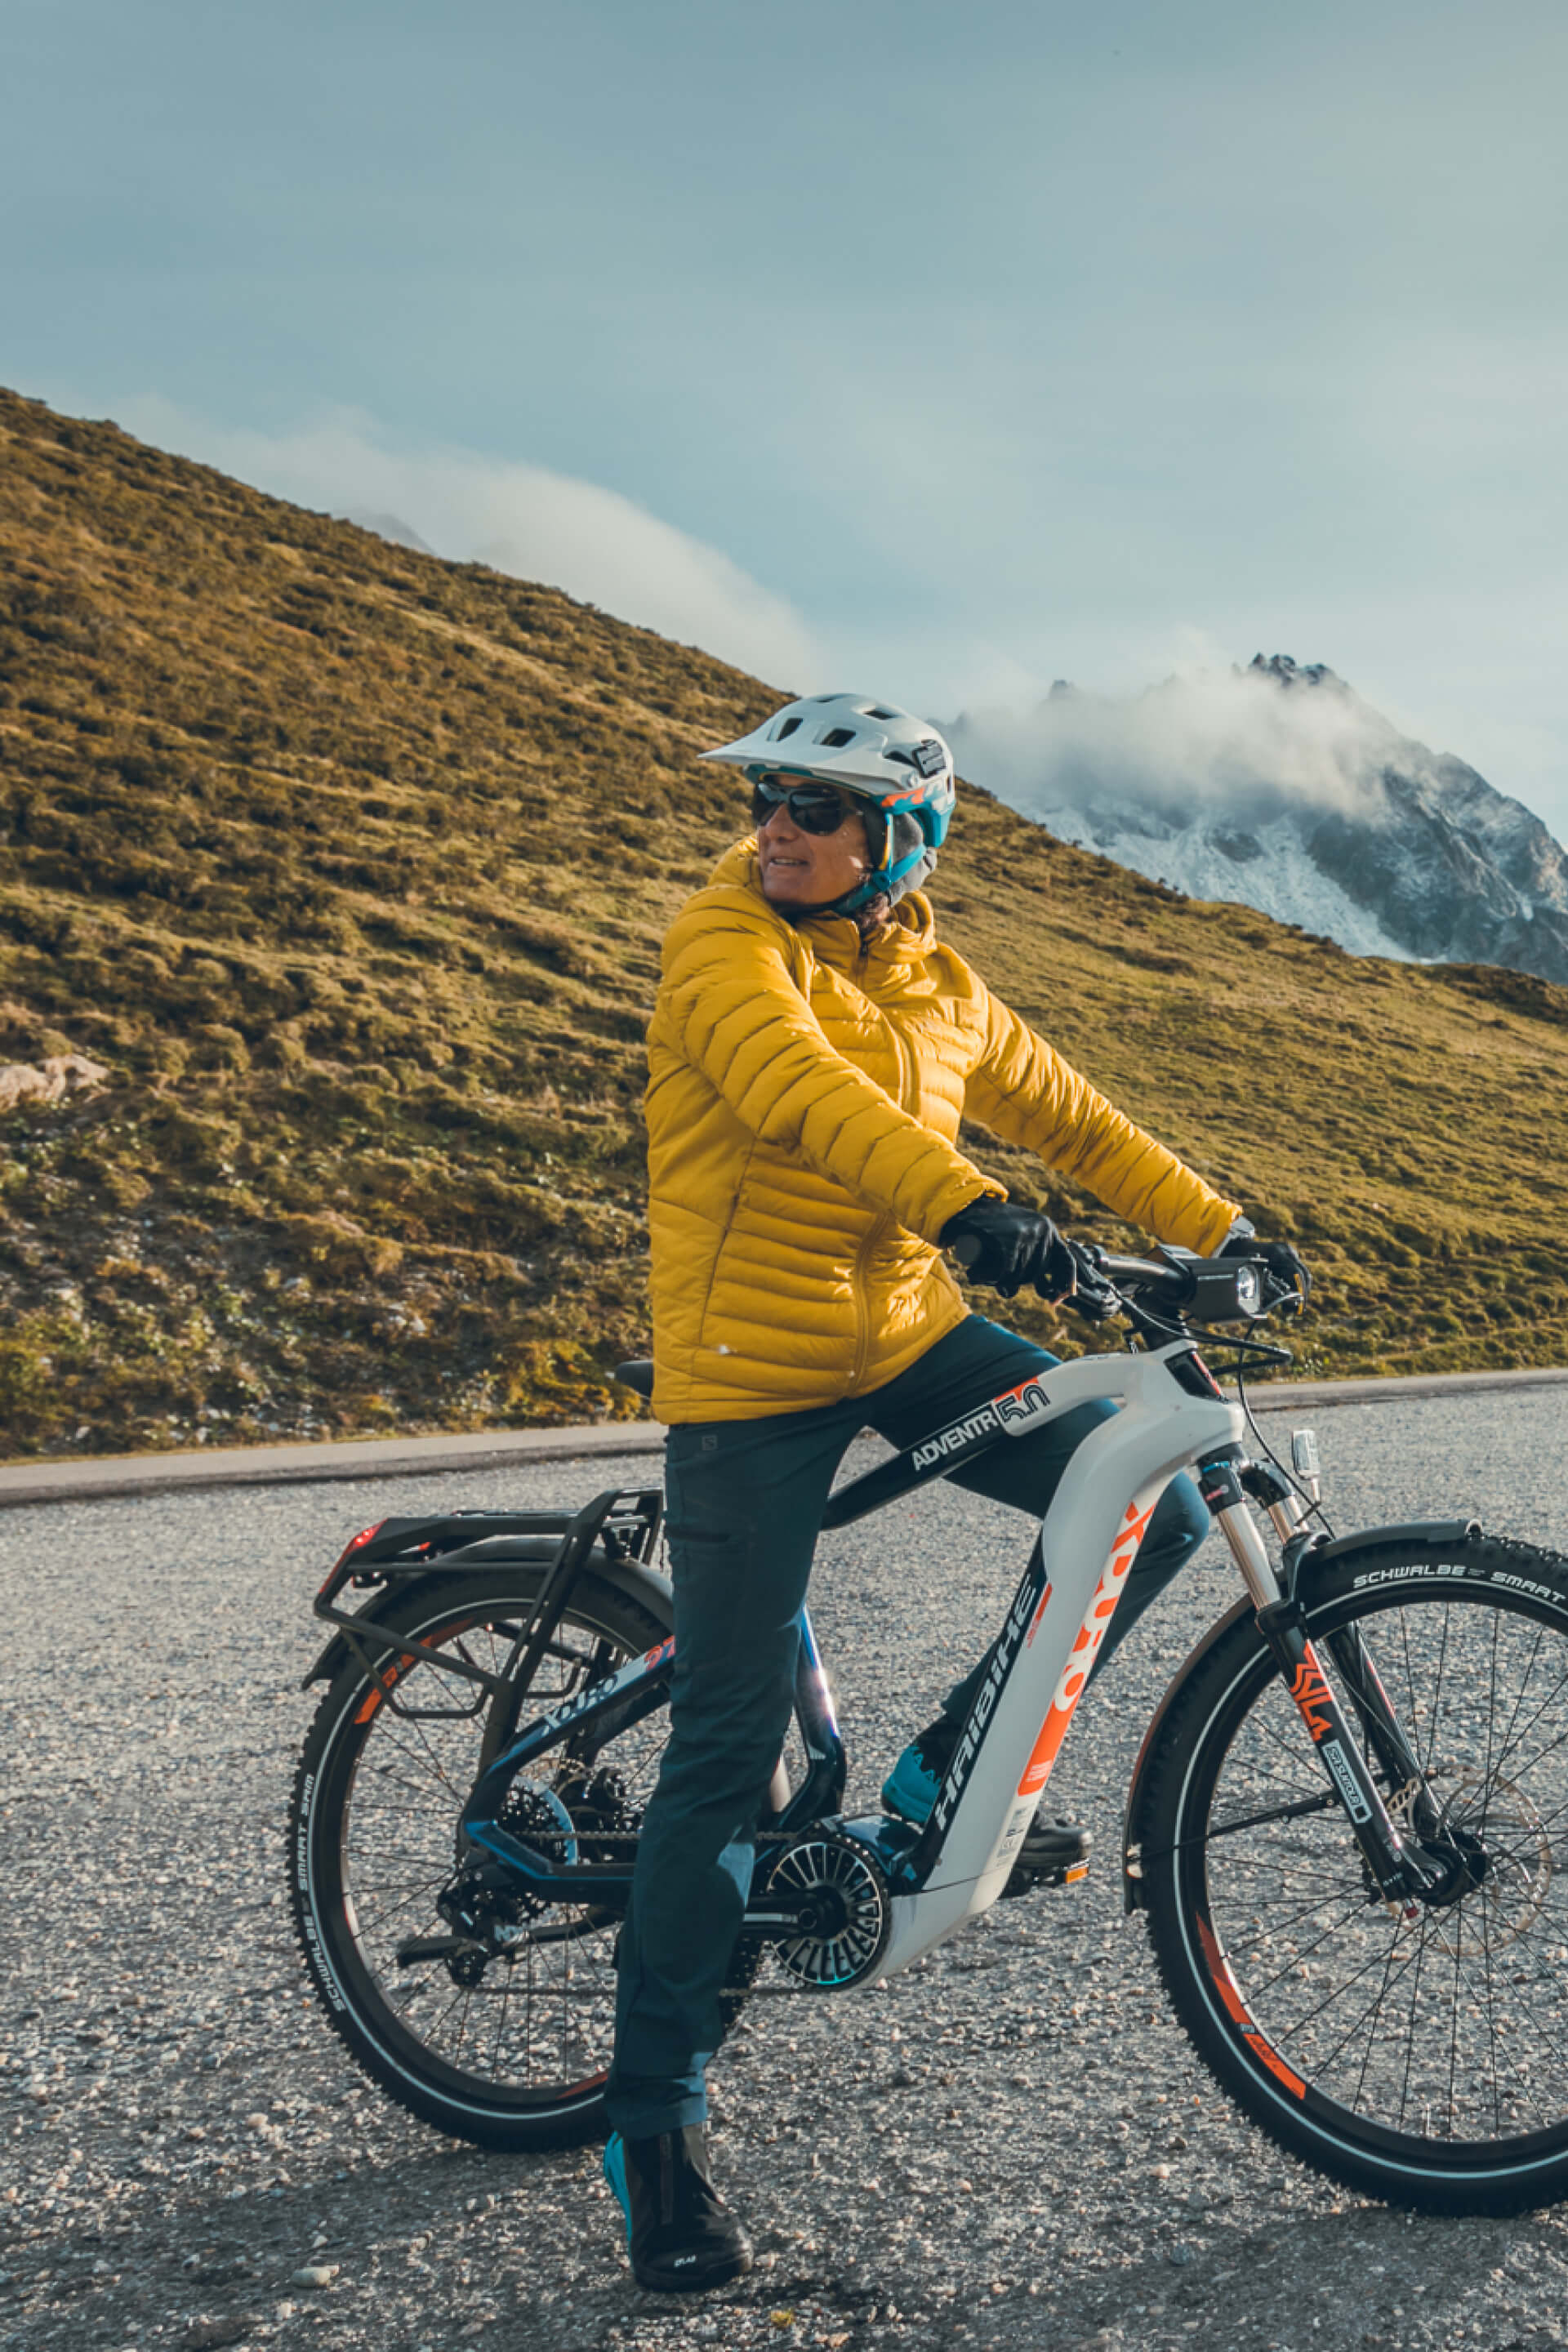 Haibike Hero Liv Sansoz and her Adventr 5.0 Trekking eBike in the mountains